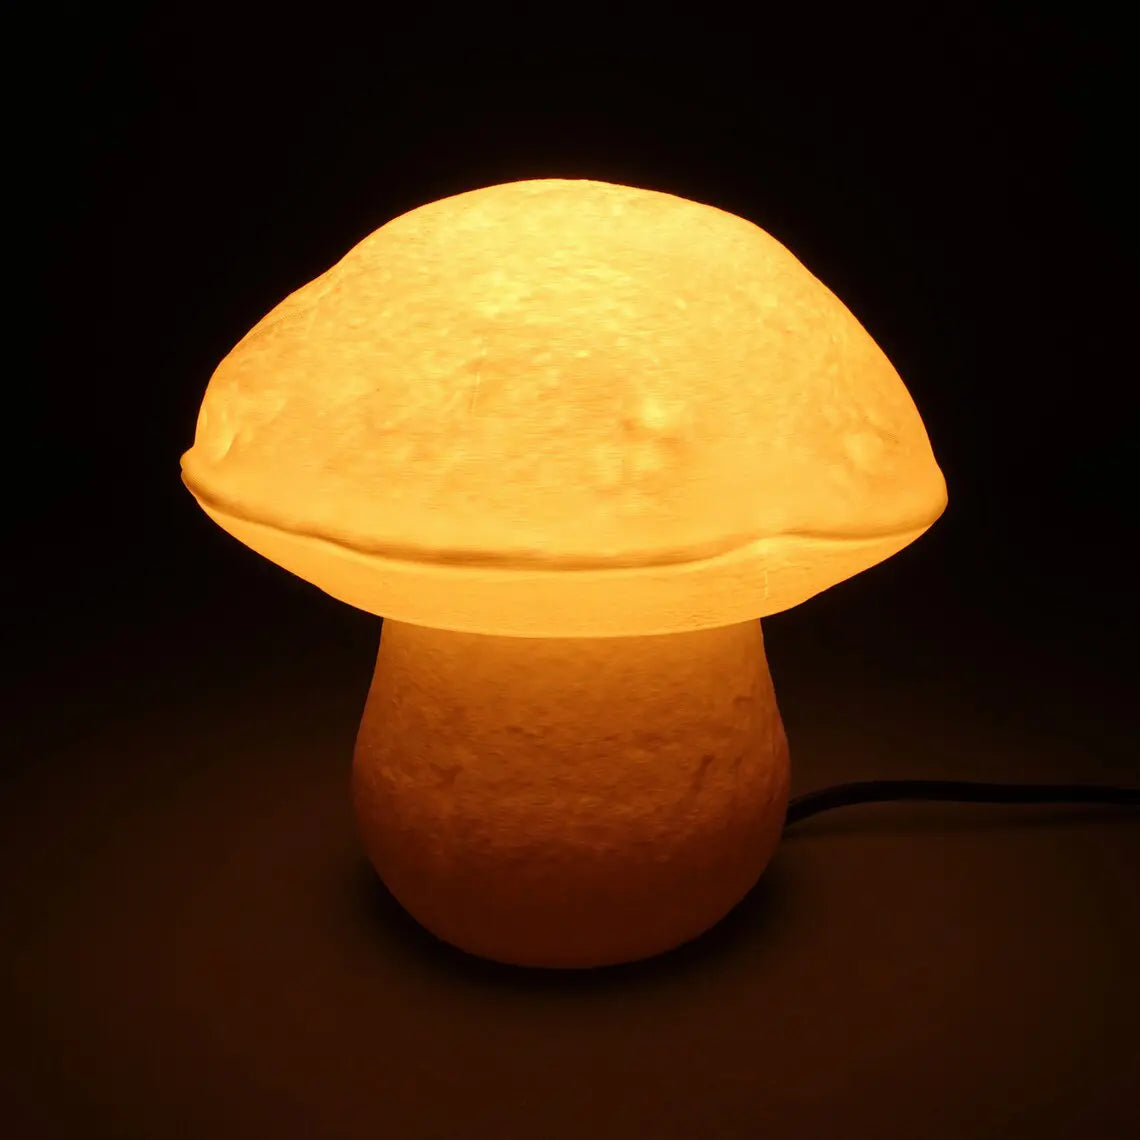 Edulis Fungus Table Lamp - Small Organic Mushroom Design in cotton white color turned on.